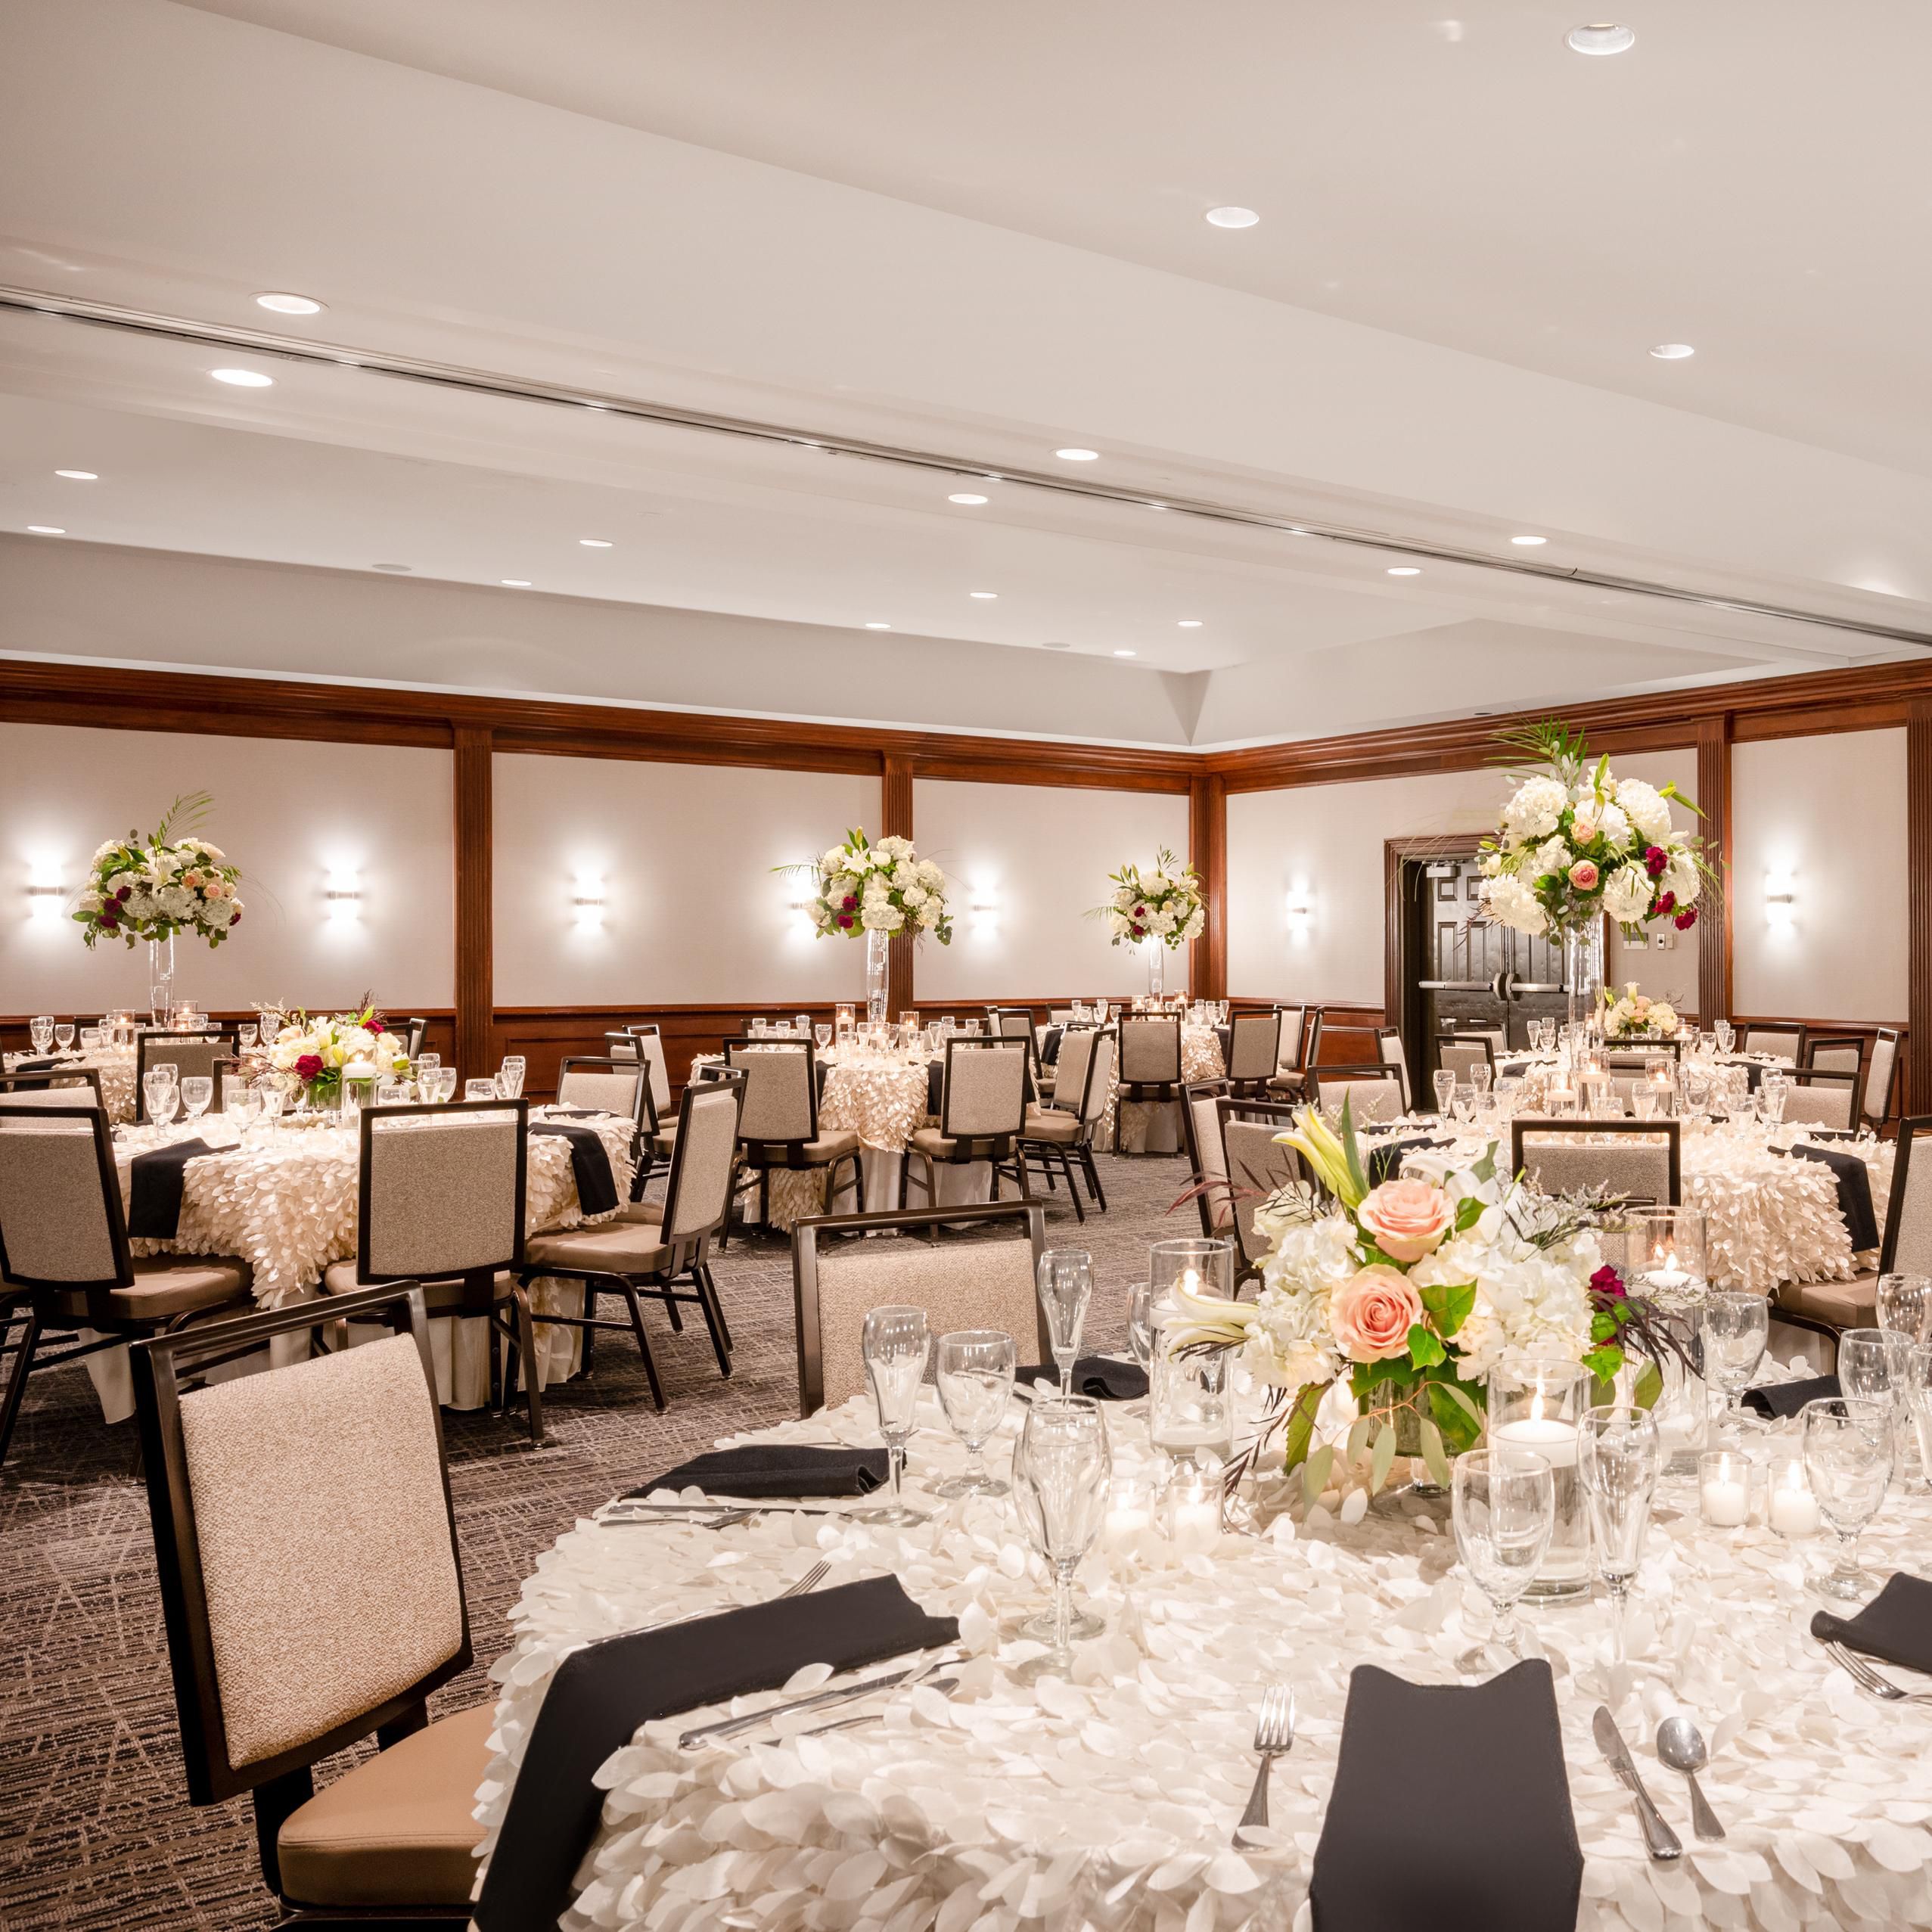 Celebrate any occasion with 120 guests in High Street Ballroom